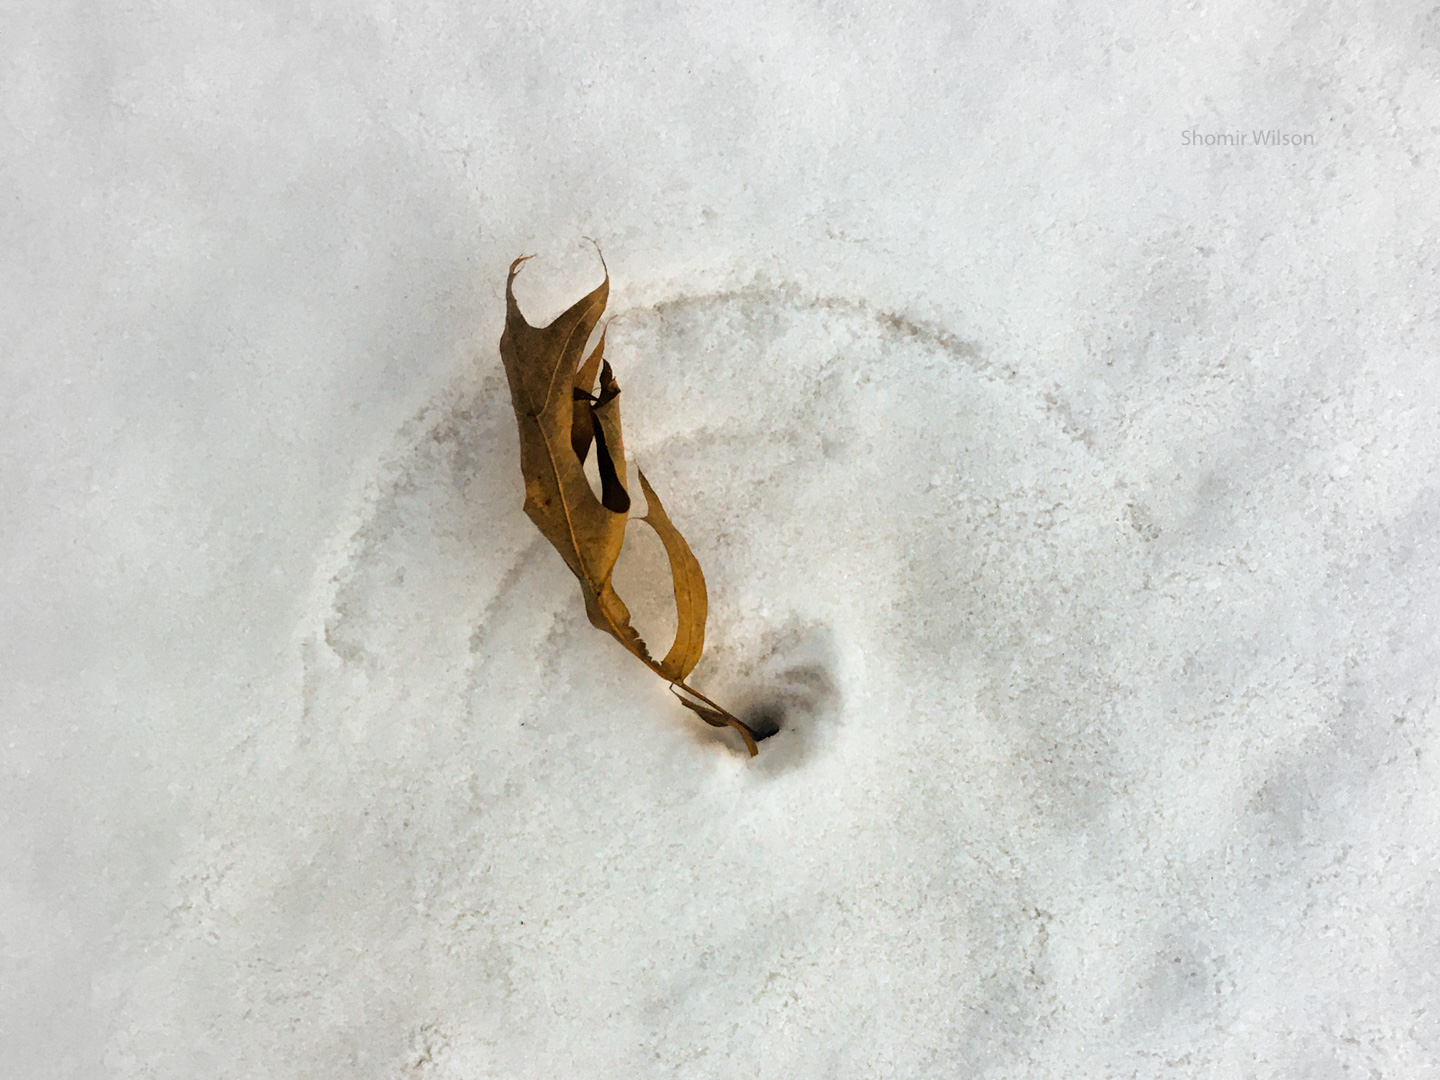 Leaf with its stem stuck in the snow and an arc of disturbed snow around it